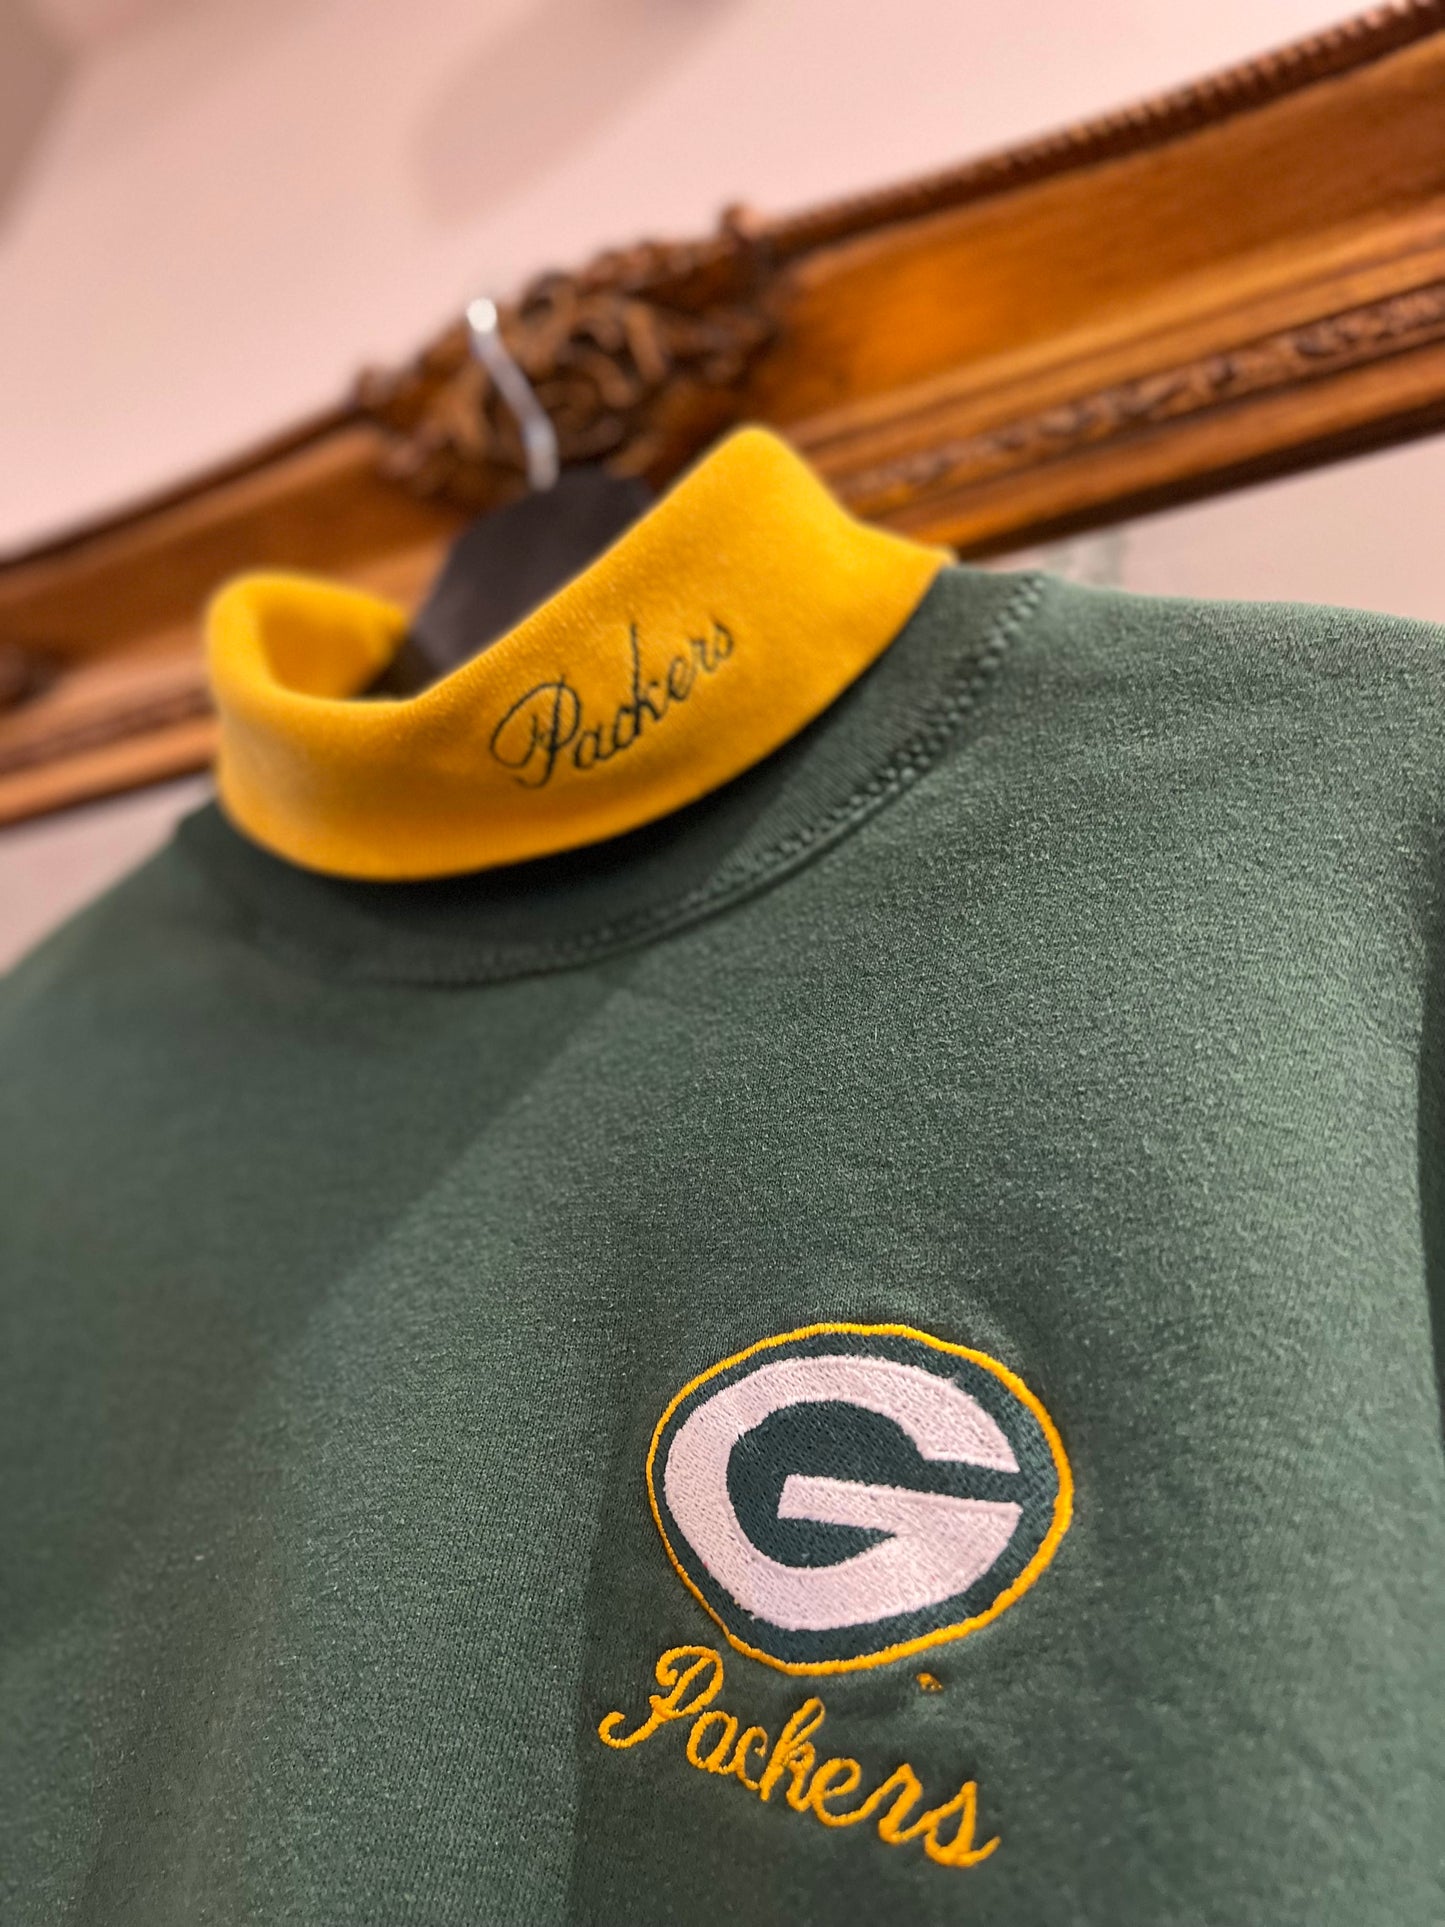 '80 Green Bay Packers Turtleneck (M)